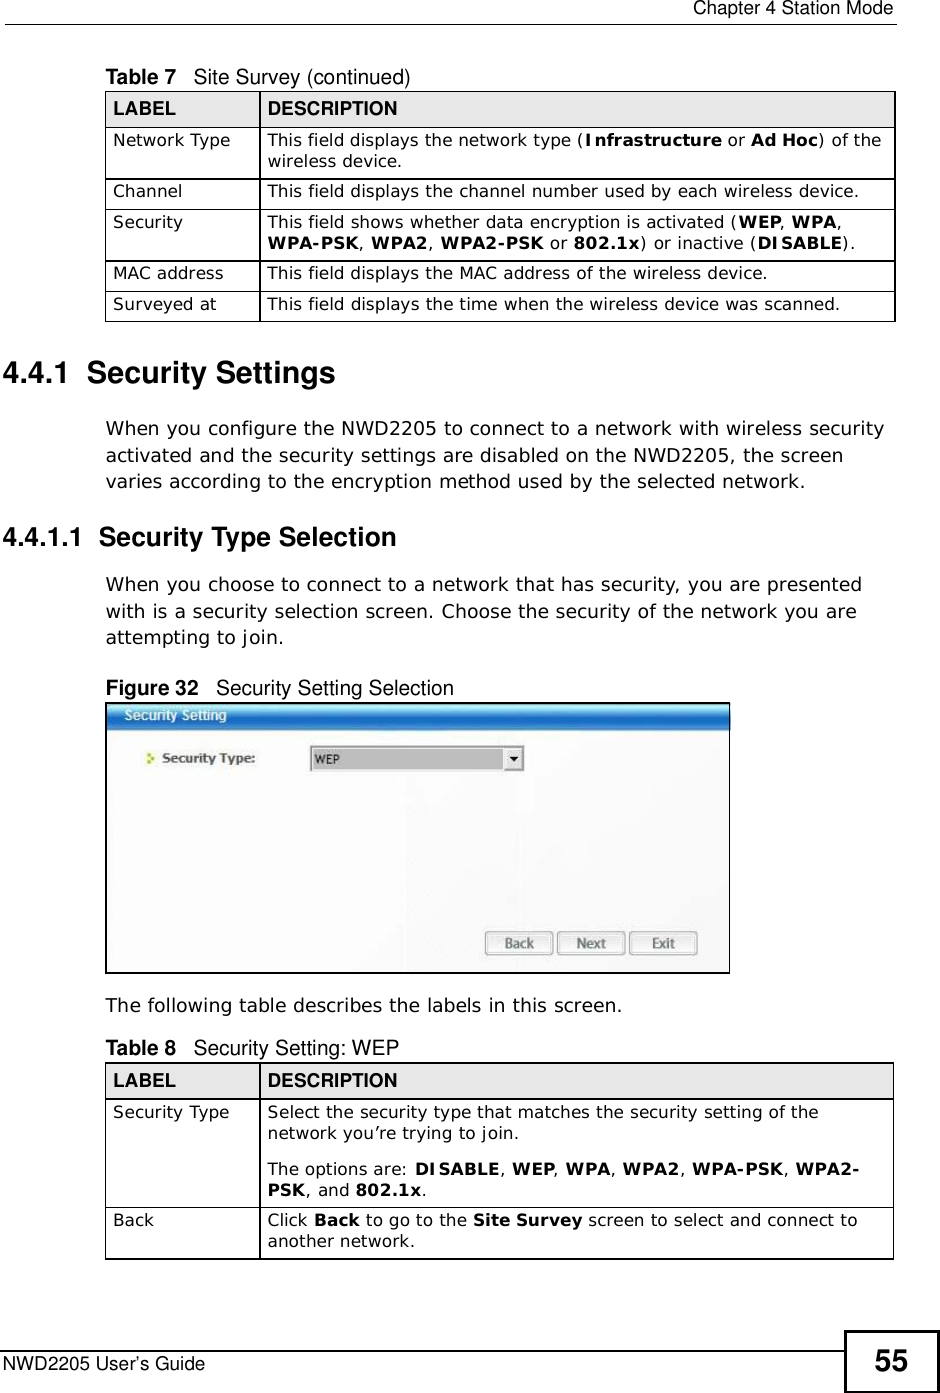  Chapter 4Station ModeNWD2205 User’s Guide 554.4.1  Security Settings When you configure the NWD2205 to connect to a network with wireless security activated and the security settings are disabled on the NWD2205, the screen varies according to the encryption method used by the selected network.4.4.1.1  Security Type SelectionWhen you choose to connect to a network that has security, you are presented with is a security selection screen. Choose the security of the network you are attempting to join.Figure 32   Security Setting Selection  The following table describes the labels in this screen.  Network Type This field displays the network type (Infrastructure or Ad Hoc) of the wireless device.ChannelThis field displays the channel number used by each wireless device.SecurityThis field shows whether data encryption is activated (WEP,WPA,WPA-PSK,WPA2,WPA2-PSK or 802.1x) or inactive (DISABLE).MAC address This field displays the MAC address of the wireless device.Surveyed at This field displays the time when the wireless device was scanned.Table 7   Site Survey (continued)LABEL DESCRIPTIONTable 8   Security Setting: WEP LABEL DESCRIPTIONSecurity TypeSelect the security type that matches the security setting of the network you’re trying to join. The options are: DISABLE,WEP,WPA,WPA2,WPA-PSK, WPA2-PSK, and 802.1x.BackClick Back to go to the Site Survey screen to select and connect to another network.